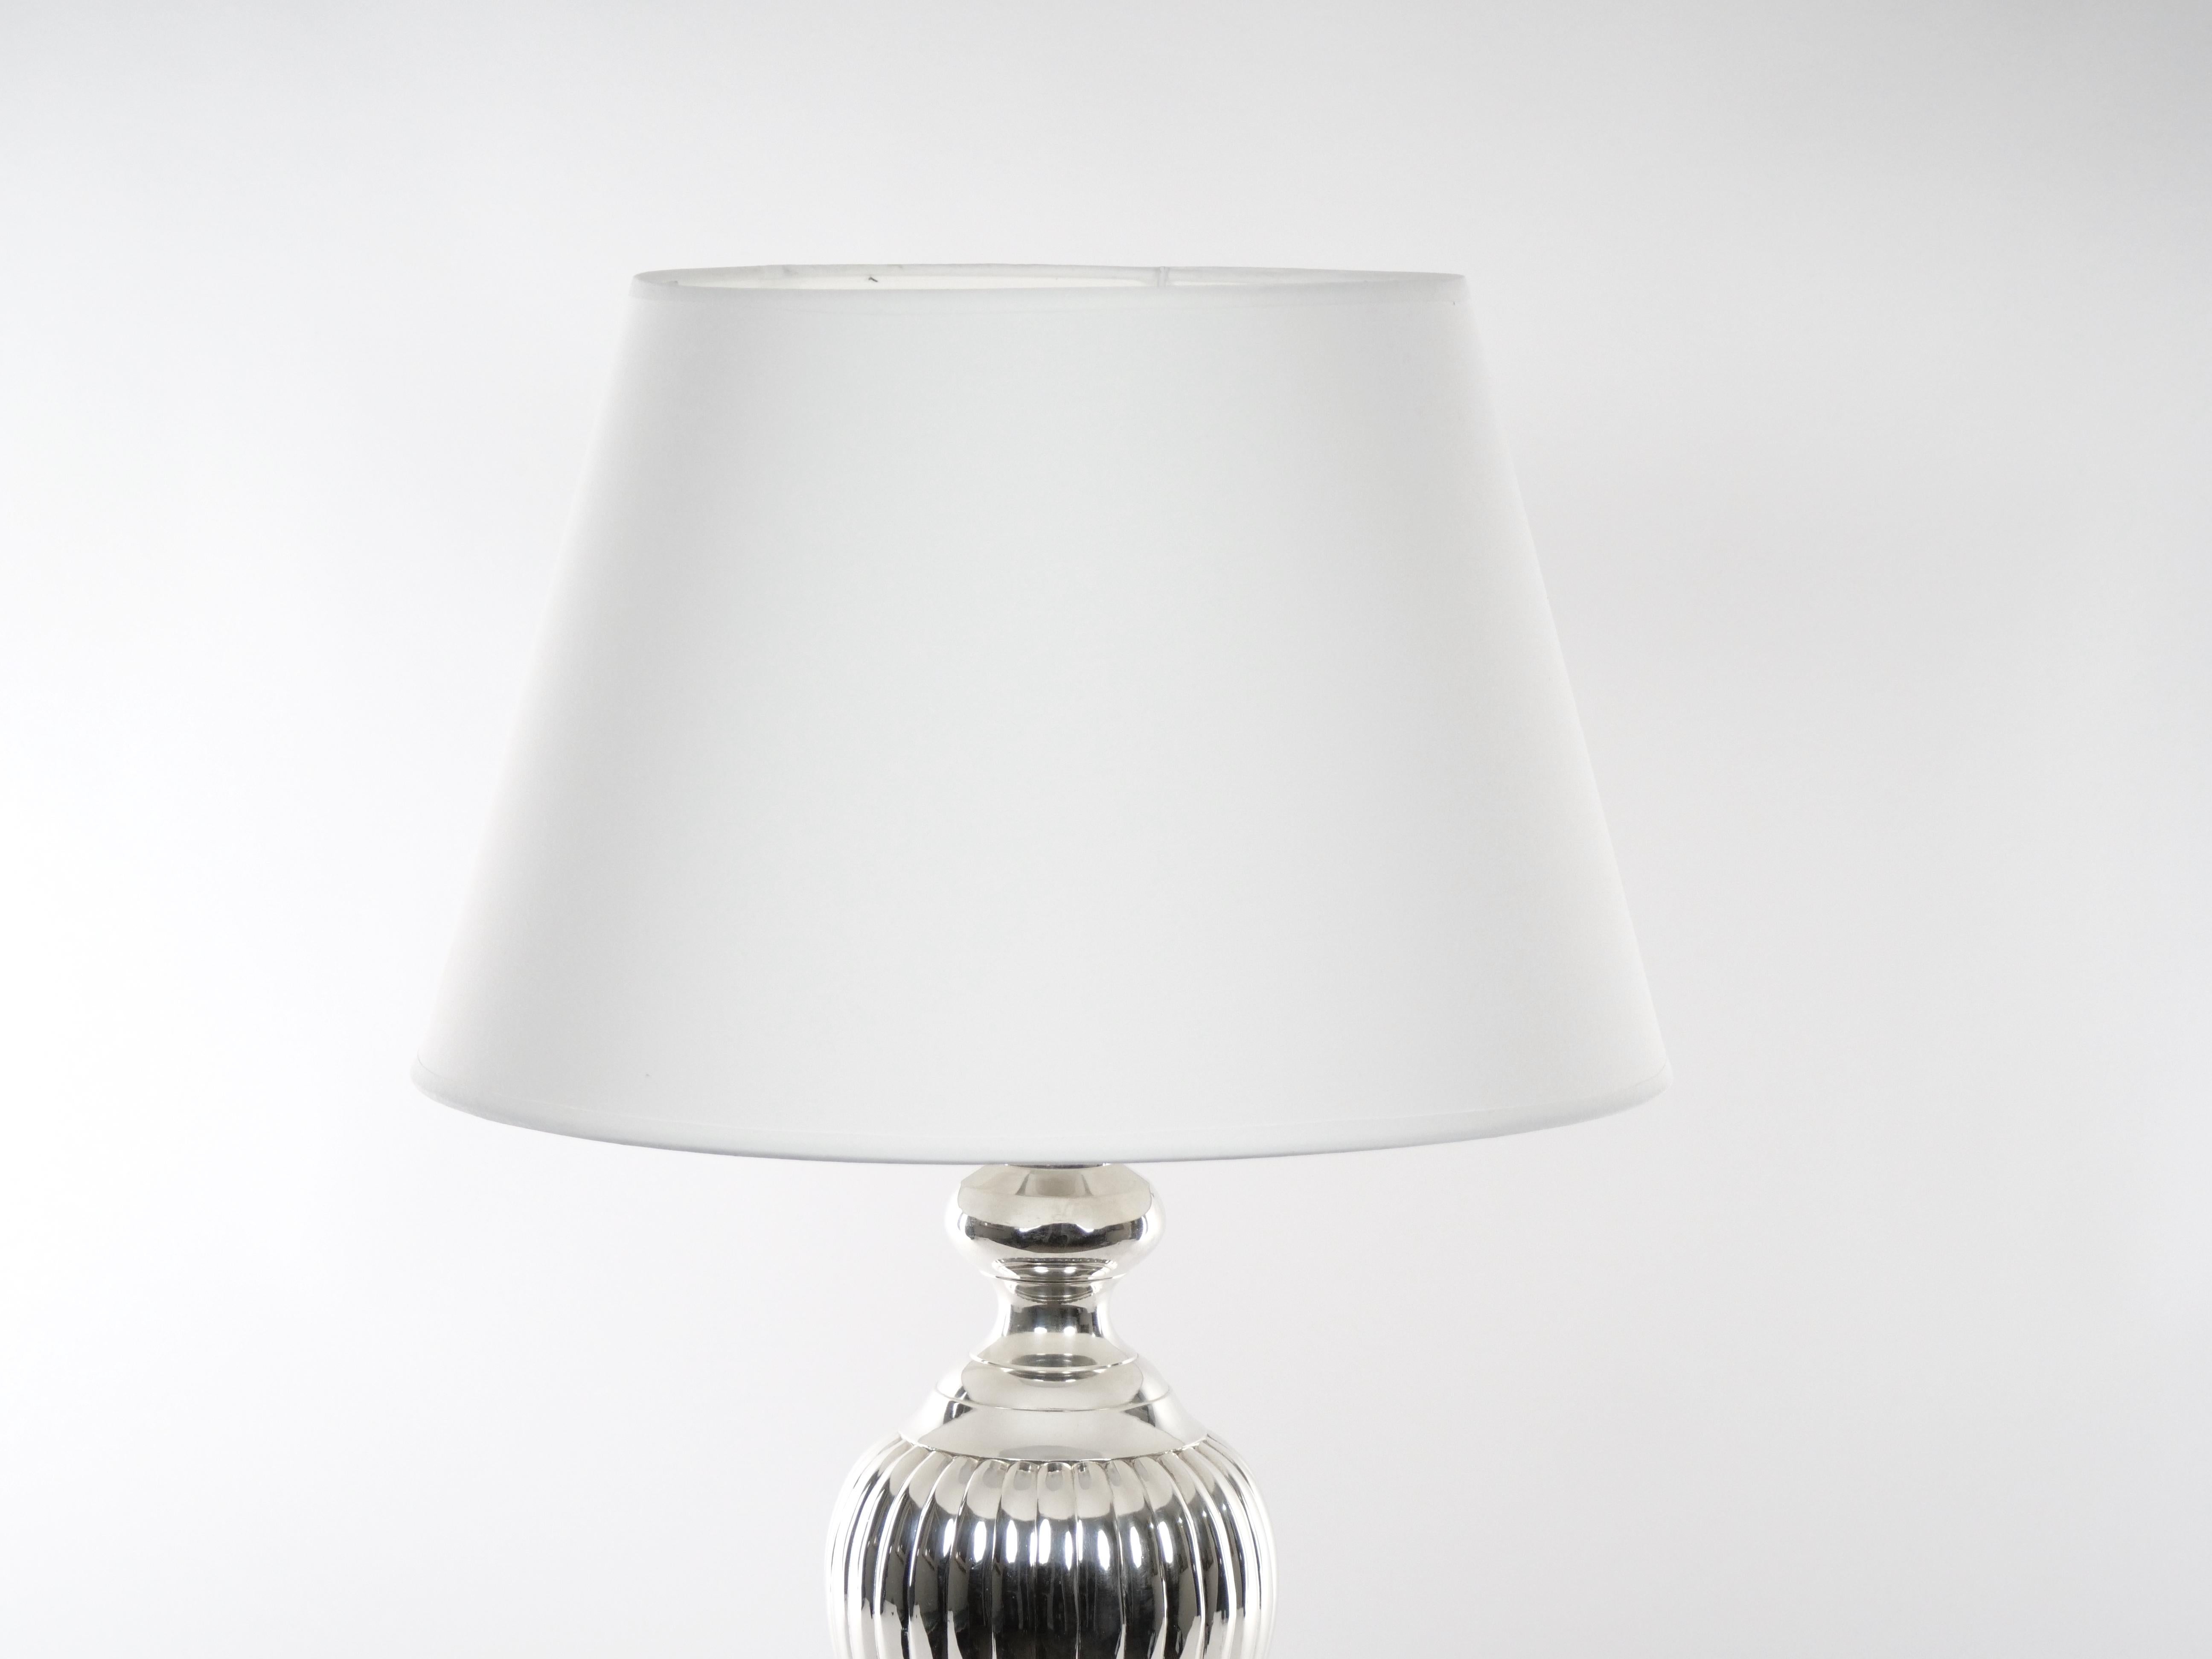 English Pair Mid-20th Century Silver Plate Table Lamp For Sale 2